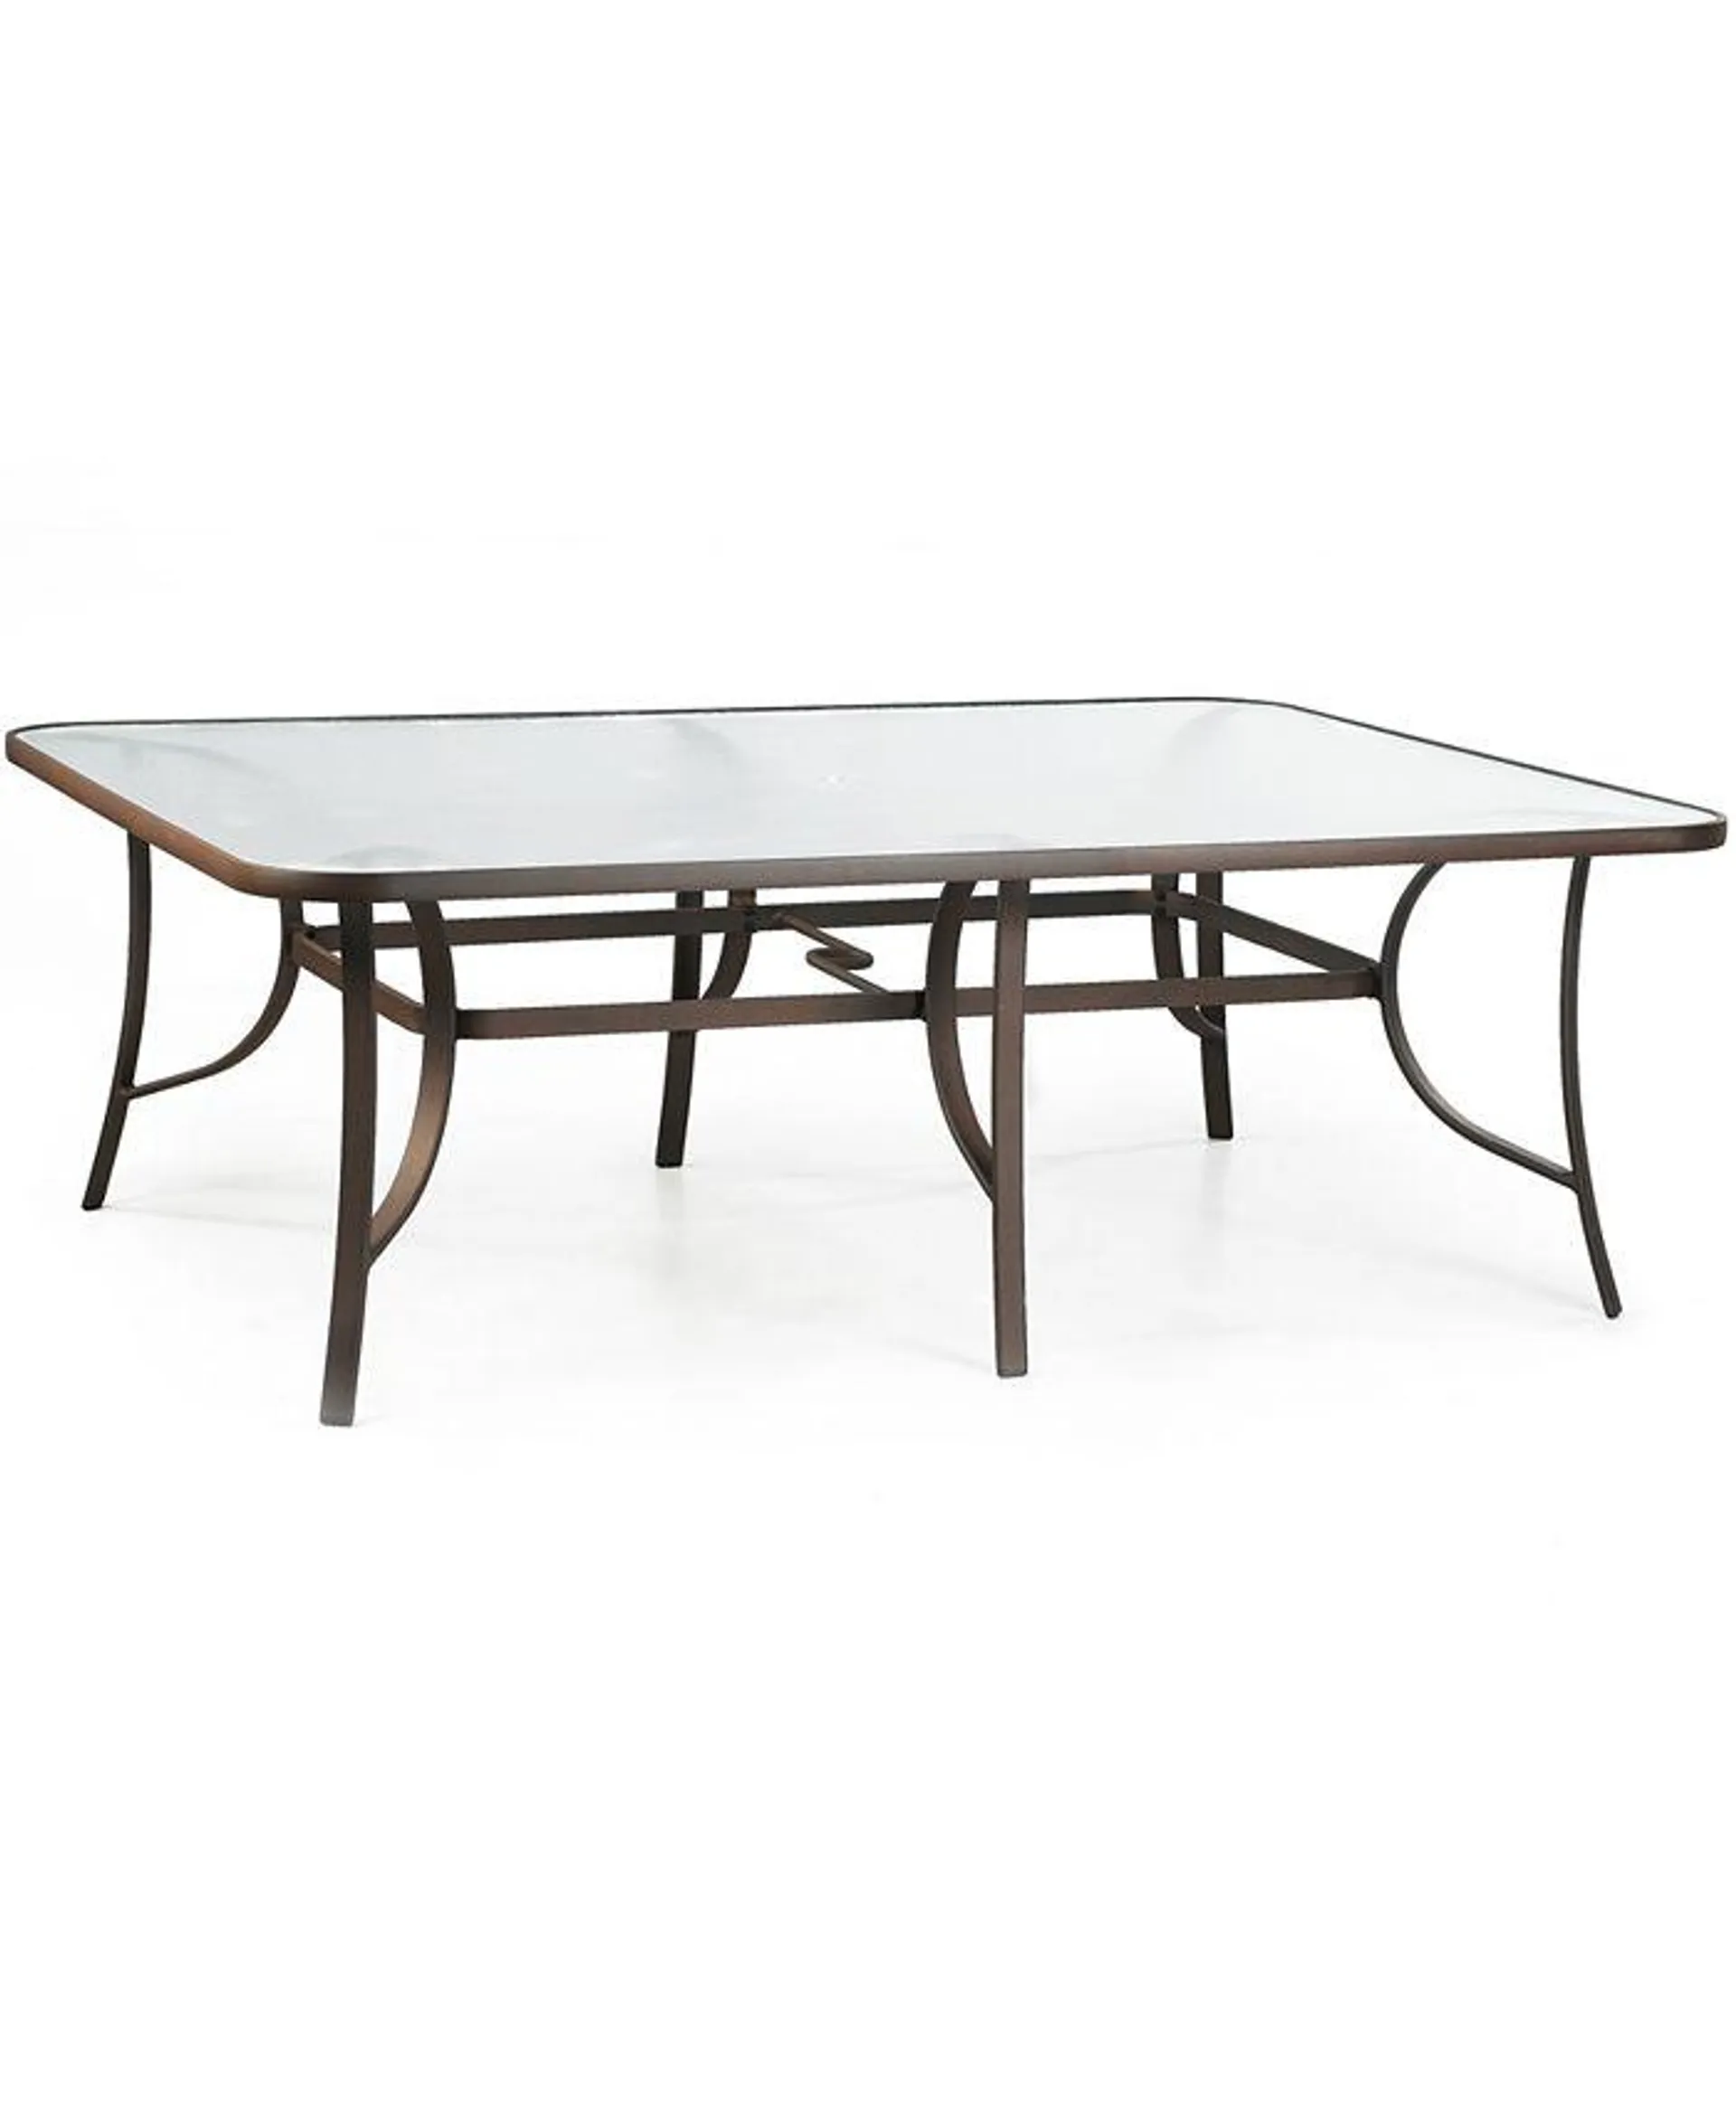 Oasis Outdoor 84" x 60" Dining Table, Created for Macy's